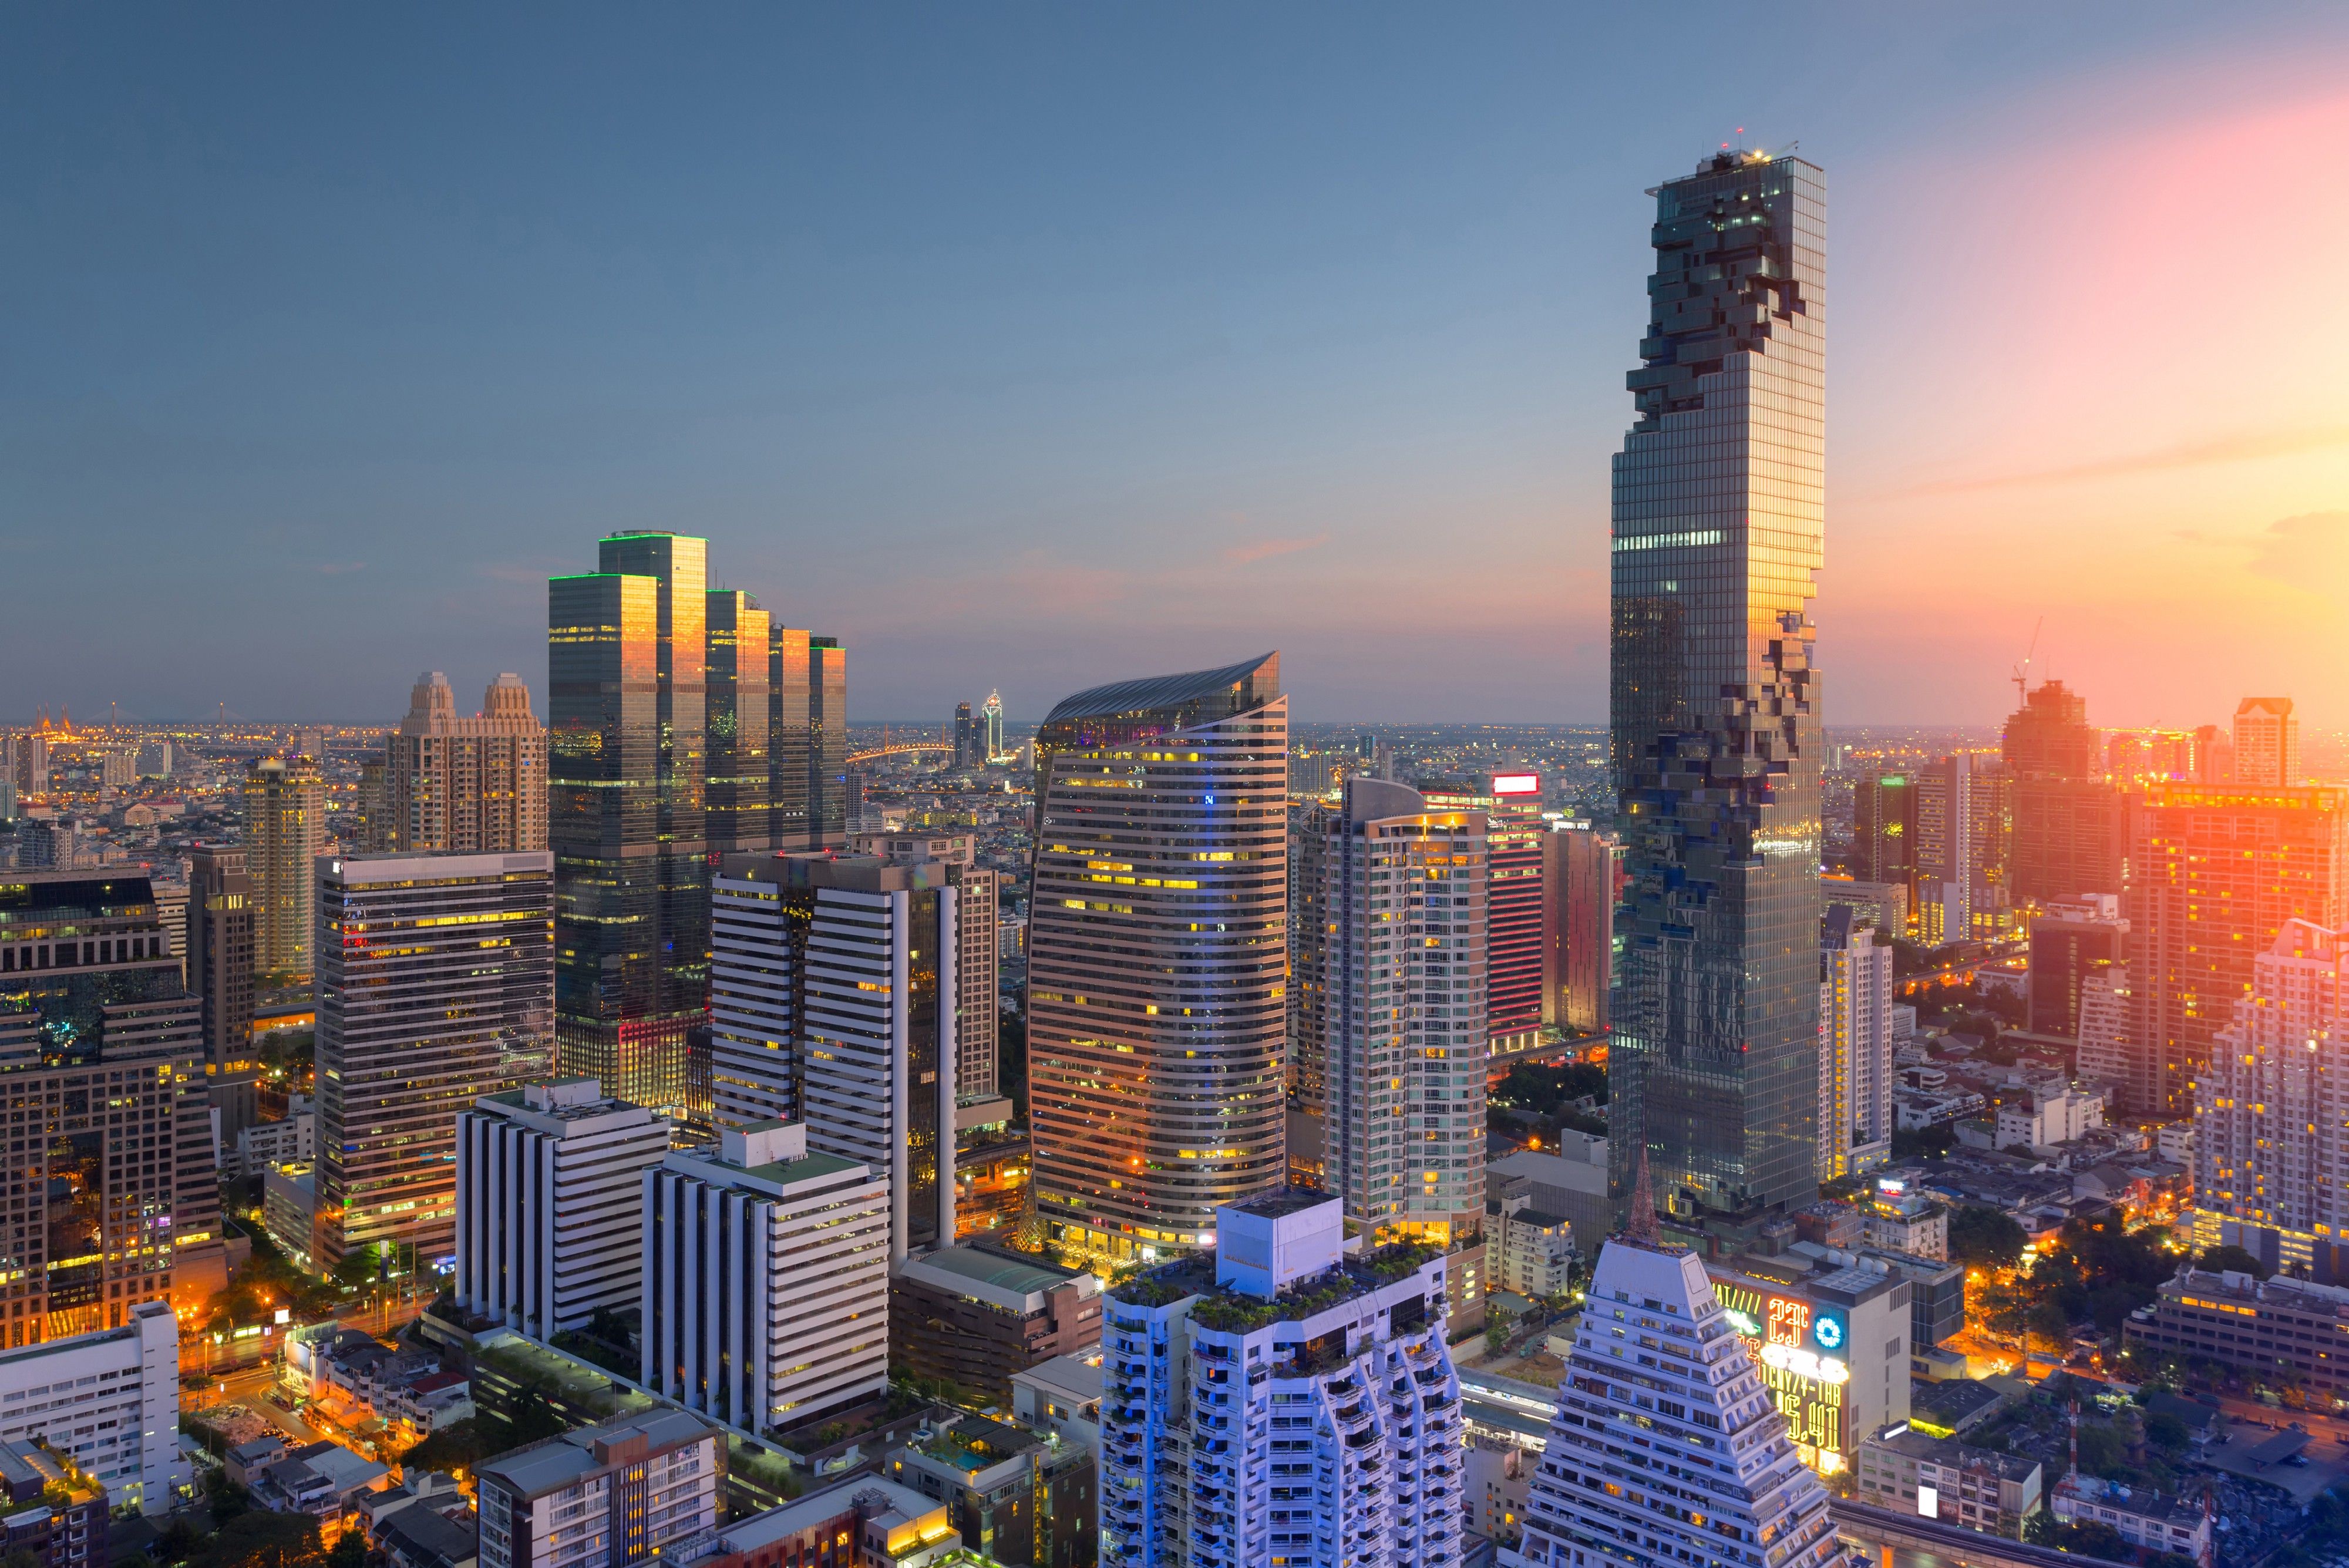 Bangkok 4K wallpaper for your desktop or mobile screen free and easy to download